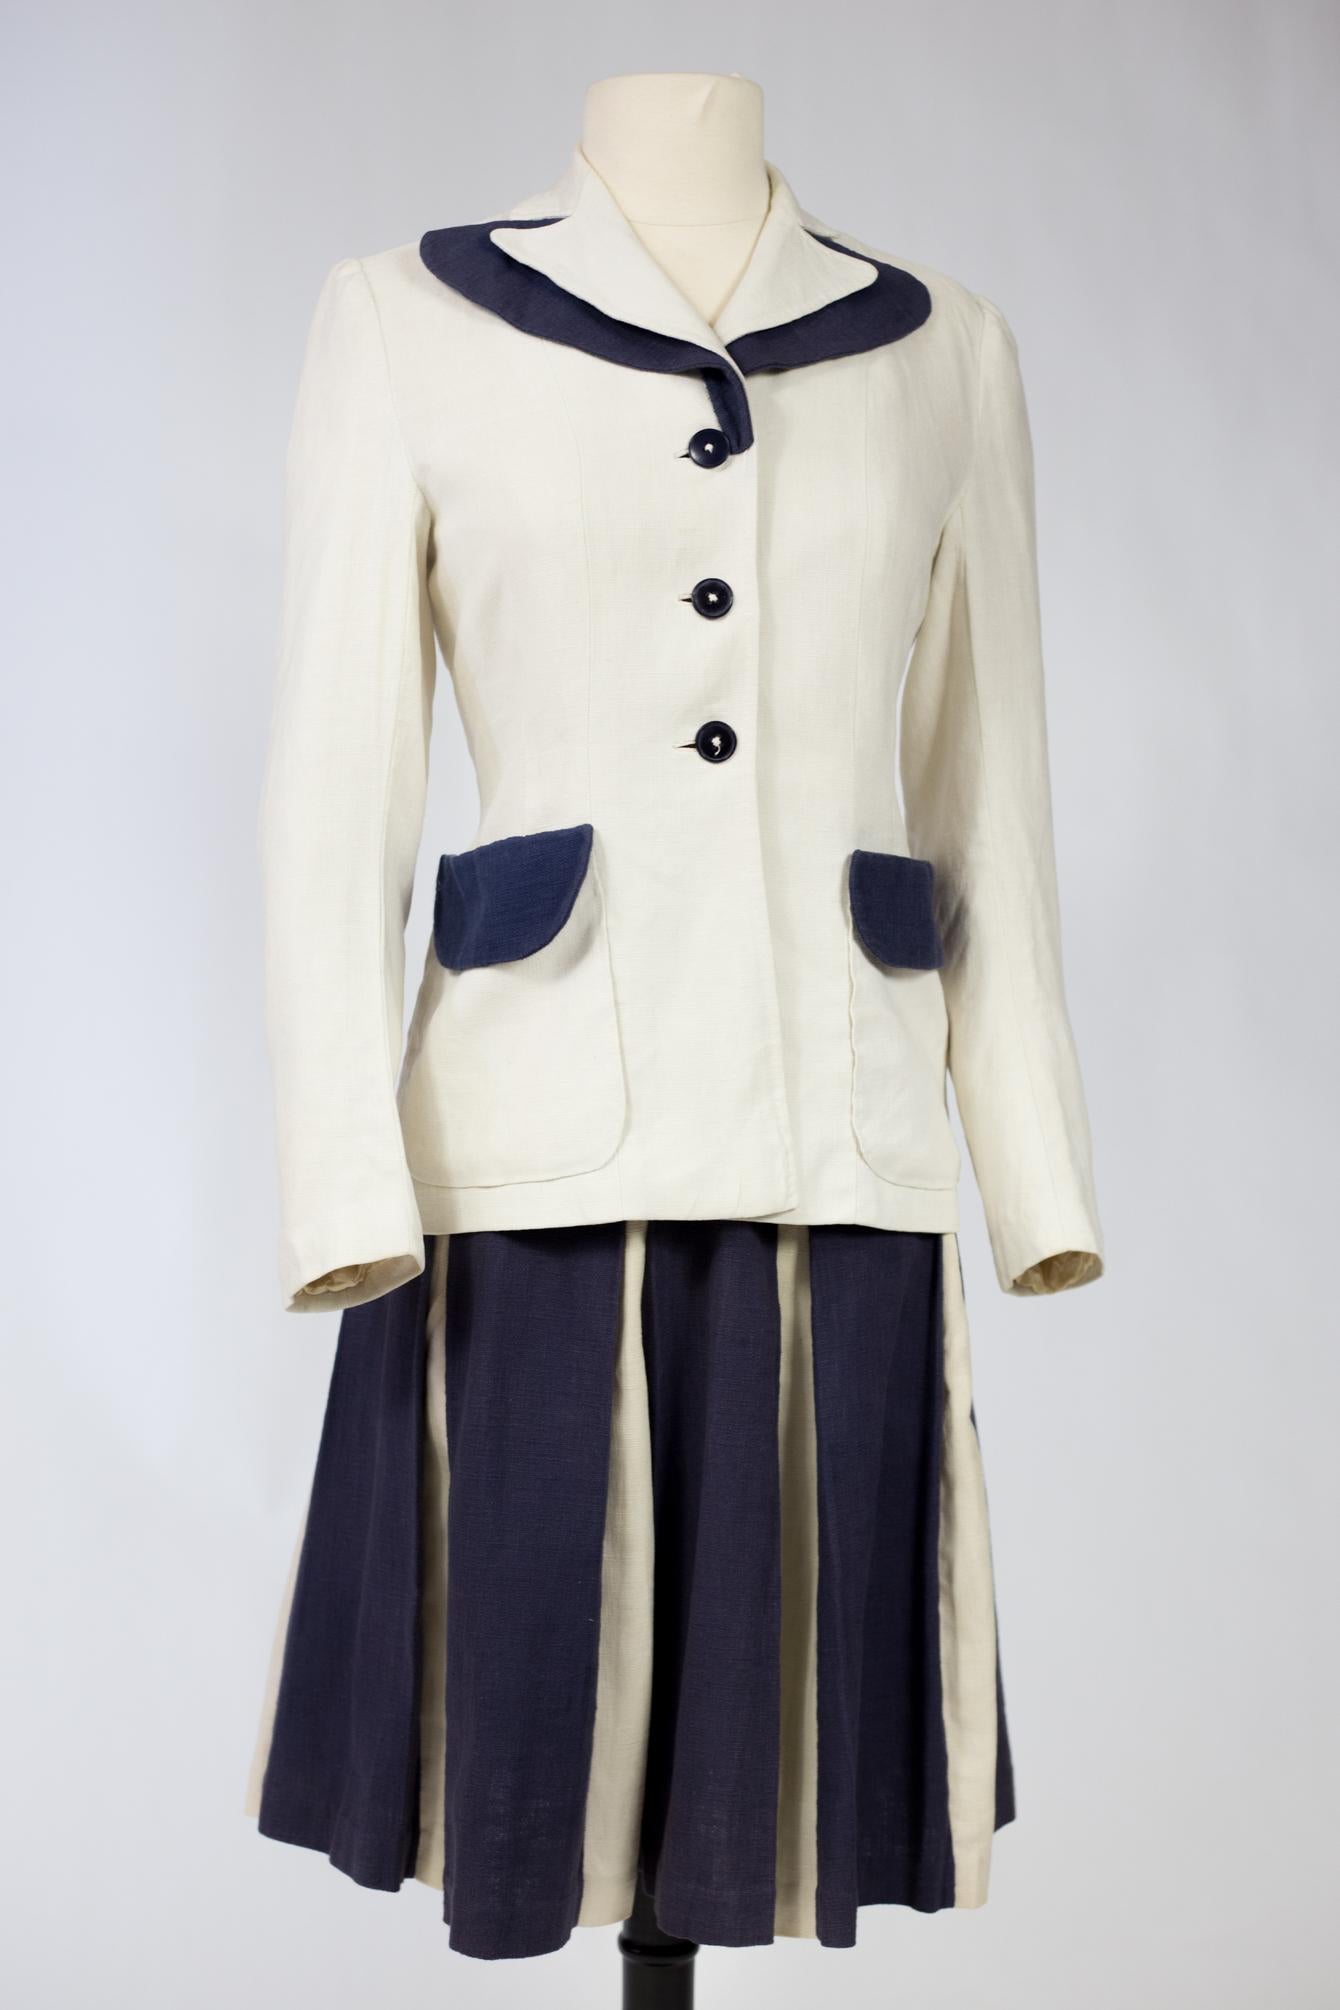 Women's A French Bar Navy suit Circa 1945/1950